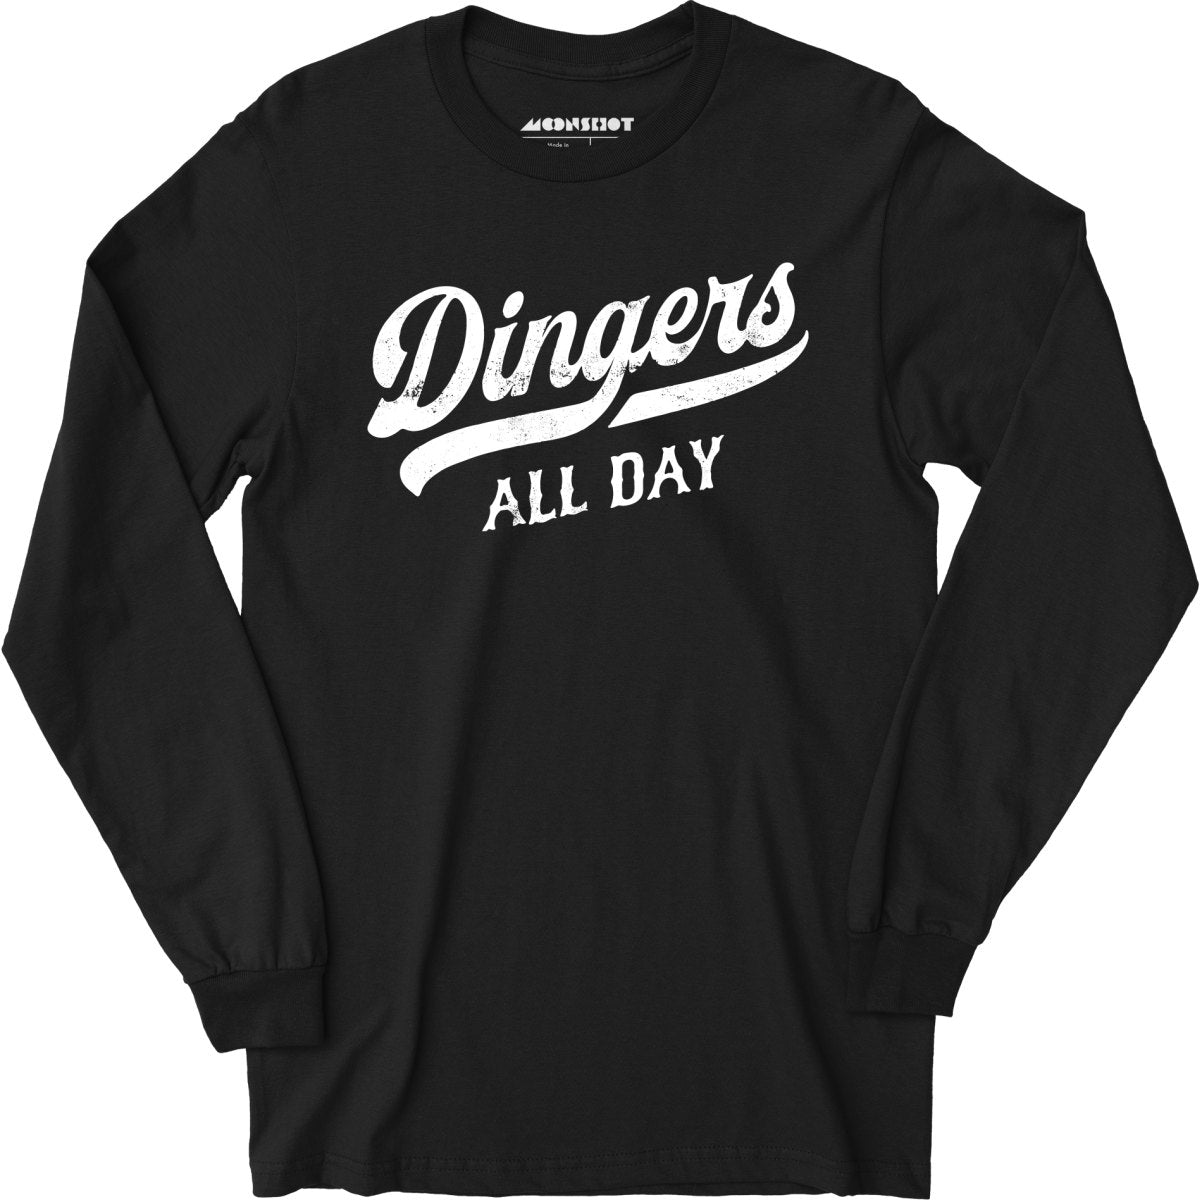 Dingers All Day - Long Sleeve T-Shirt